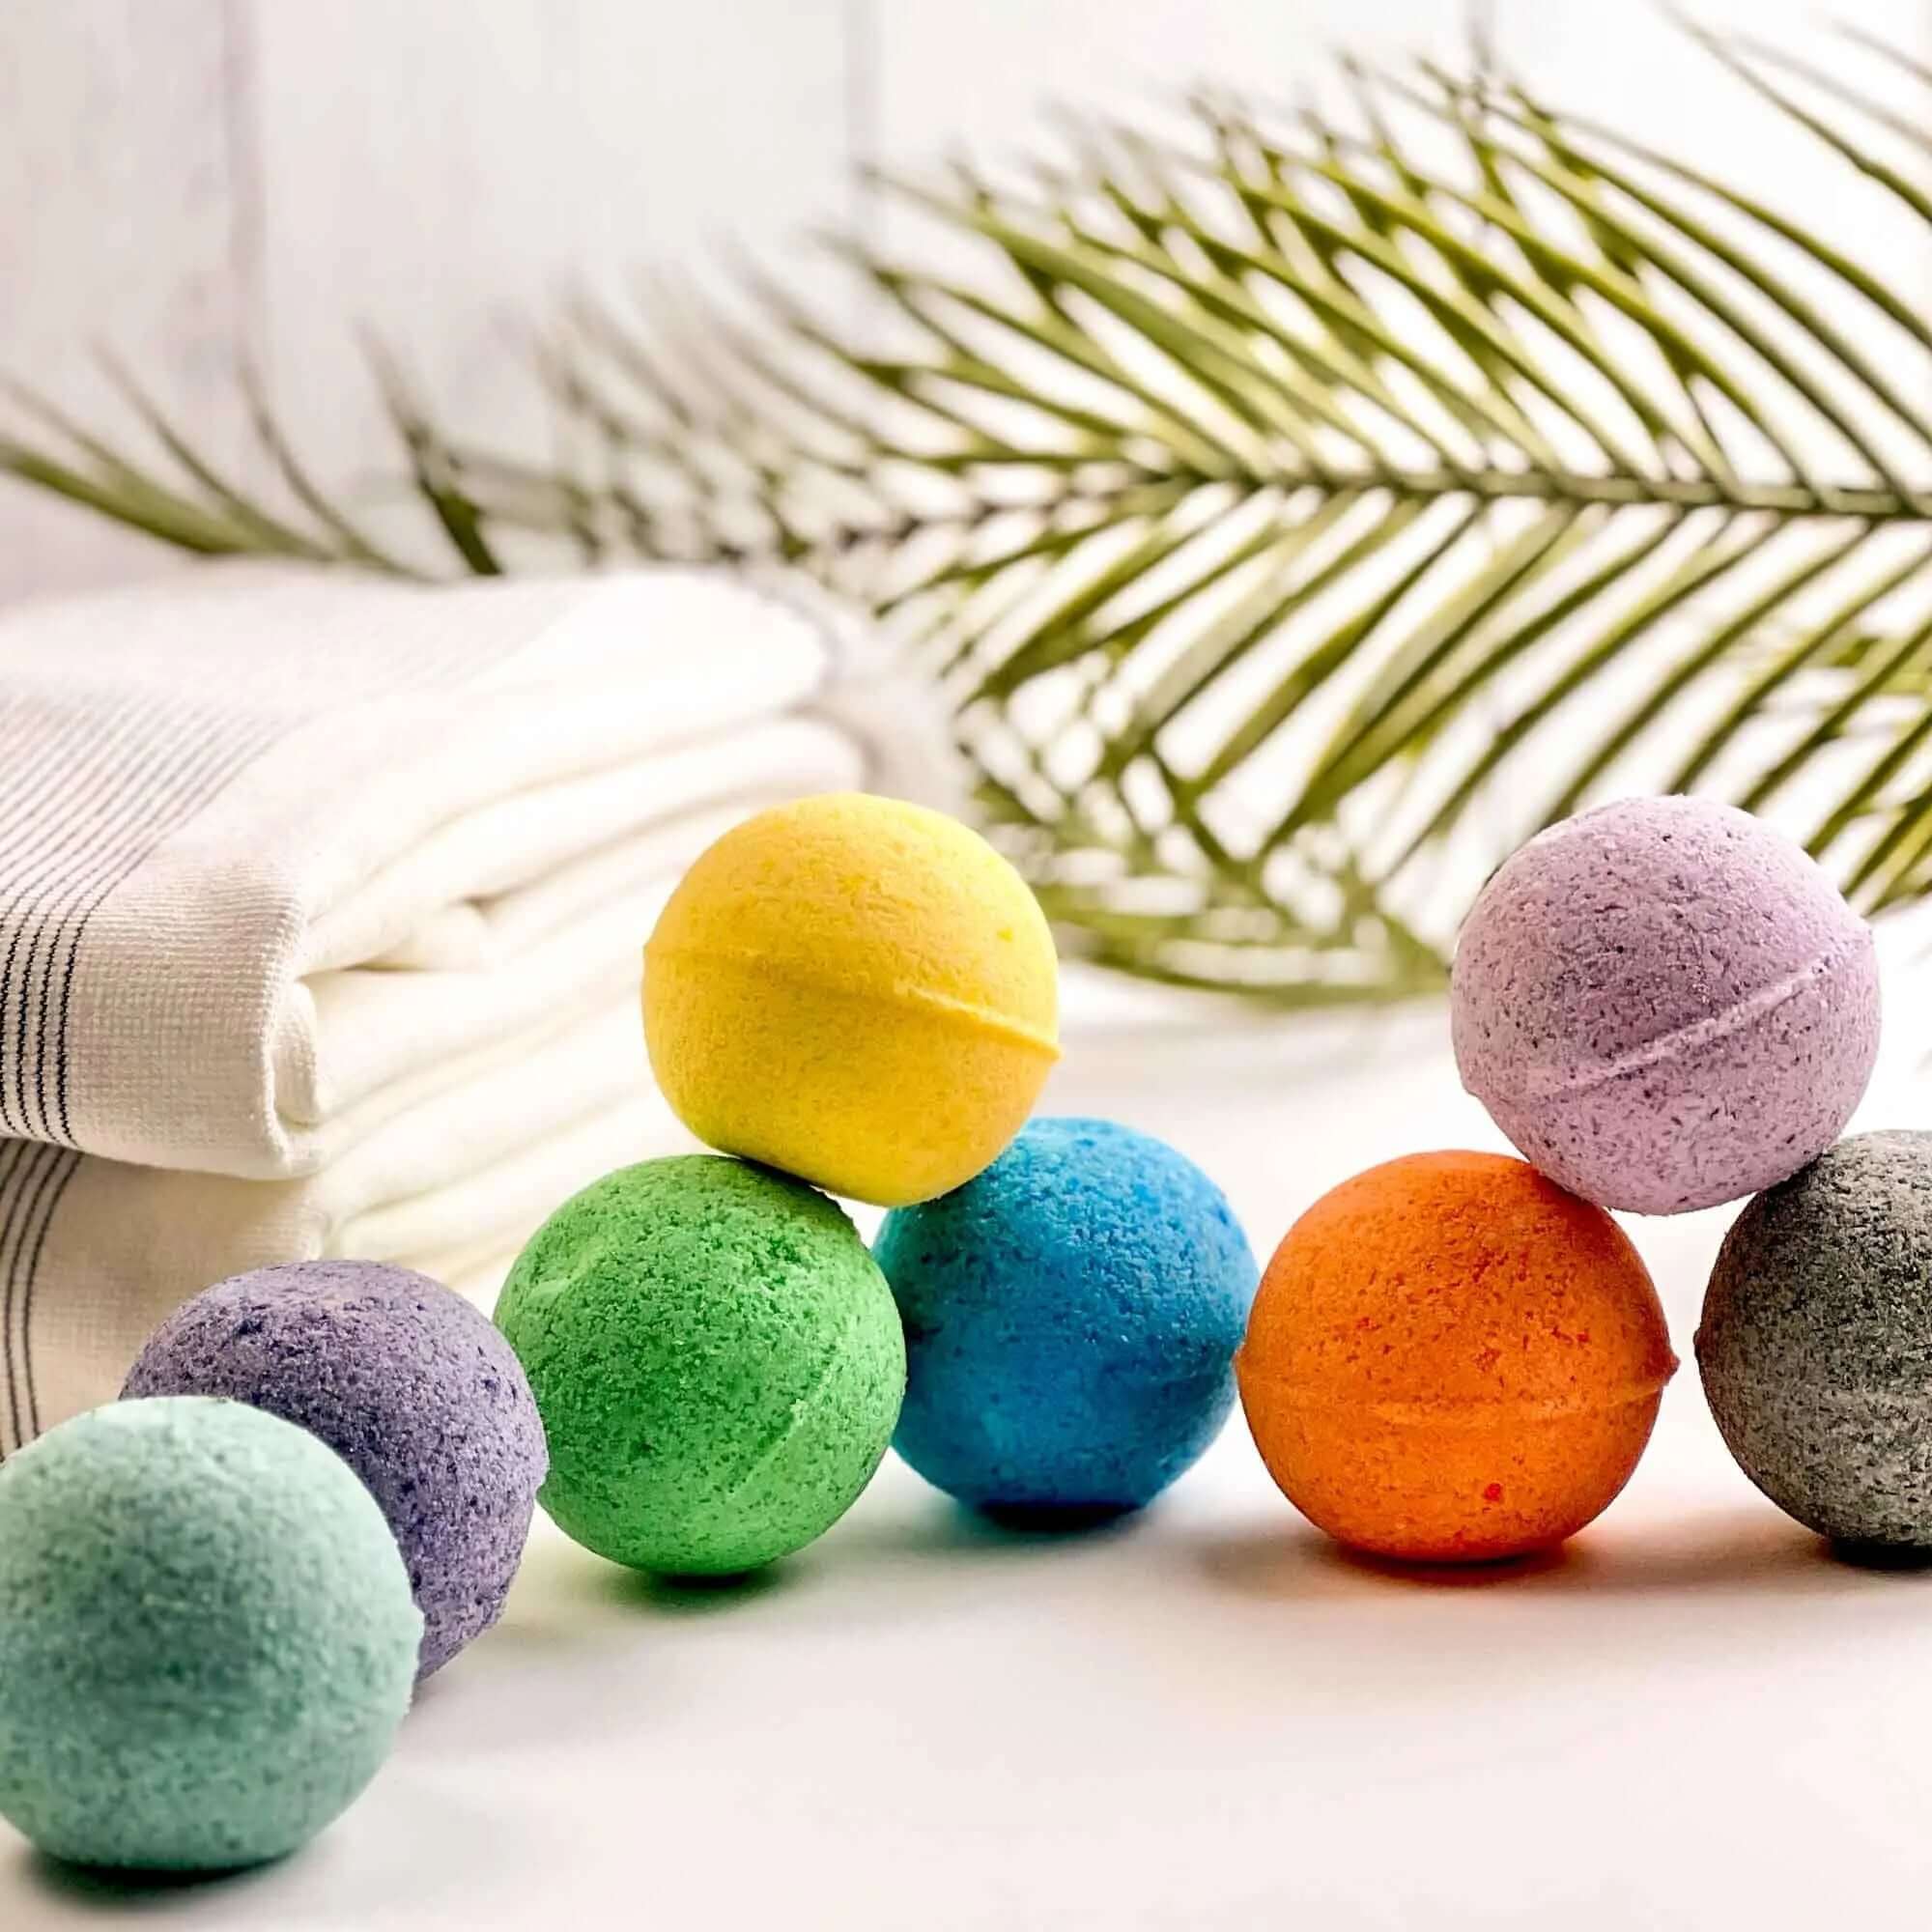 Black Sea Bath Bombs - Handmade Spa Fizzies with a Refreshing Oceanic Scent